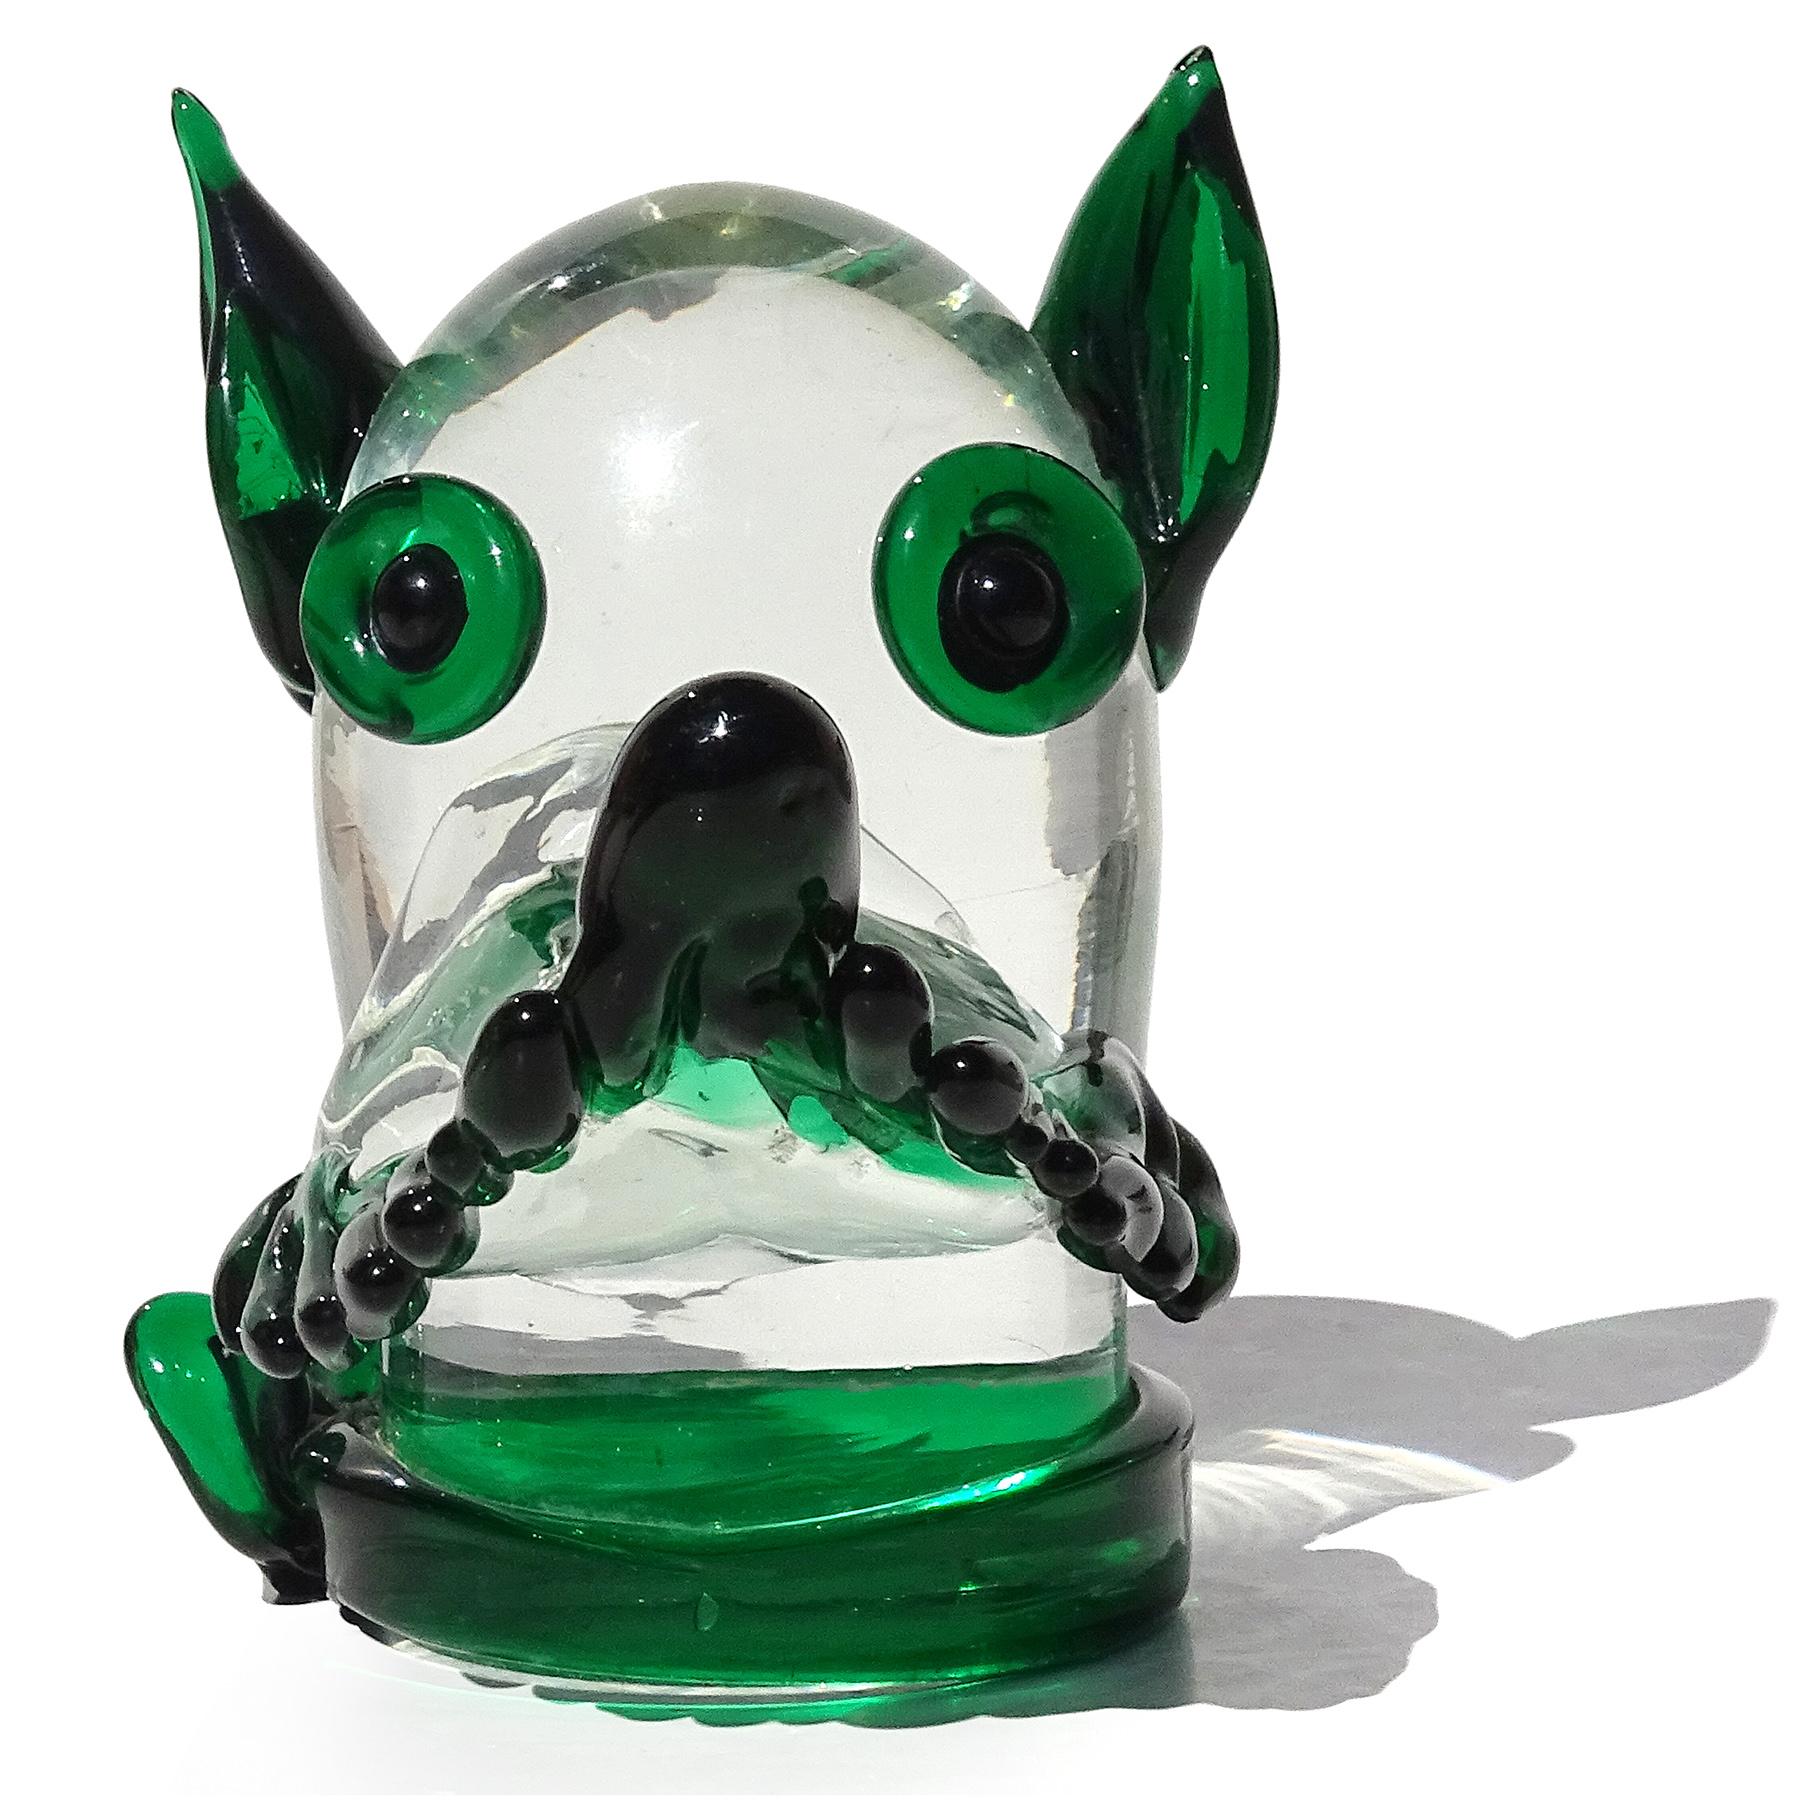 Cute vintage Murano hand blown green and clear Italian art glass puppy dog head sculpture or paperweight. Documented to the Fratelli Toso company. Believe it is supposed to be a Terrier or Scotty dog. The head has a tied handkerchief around its